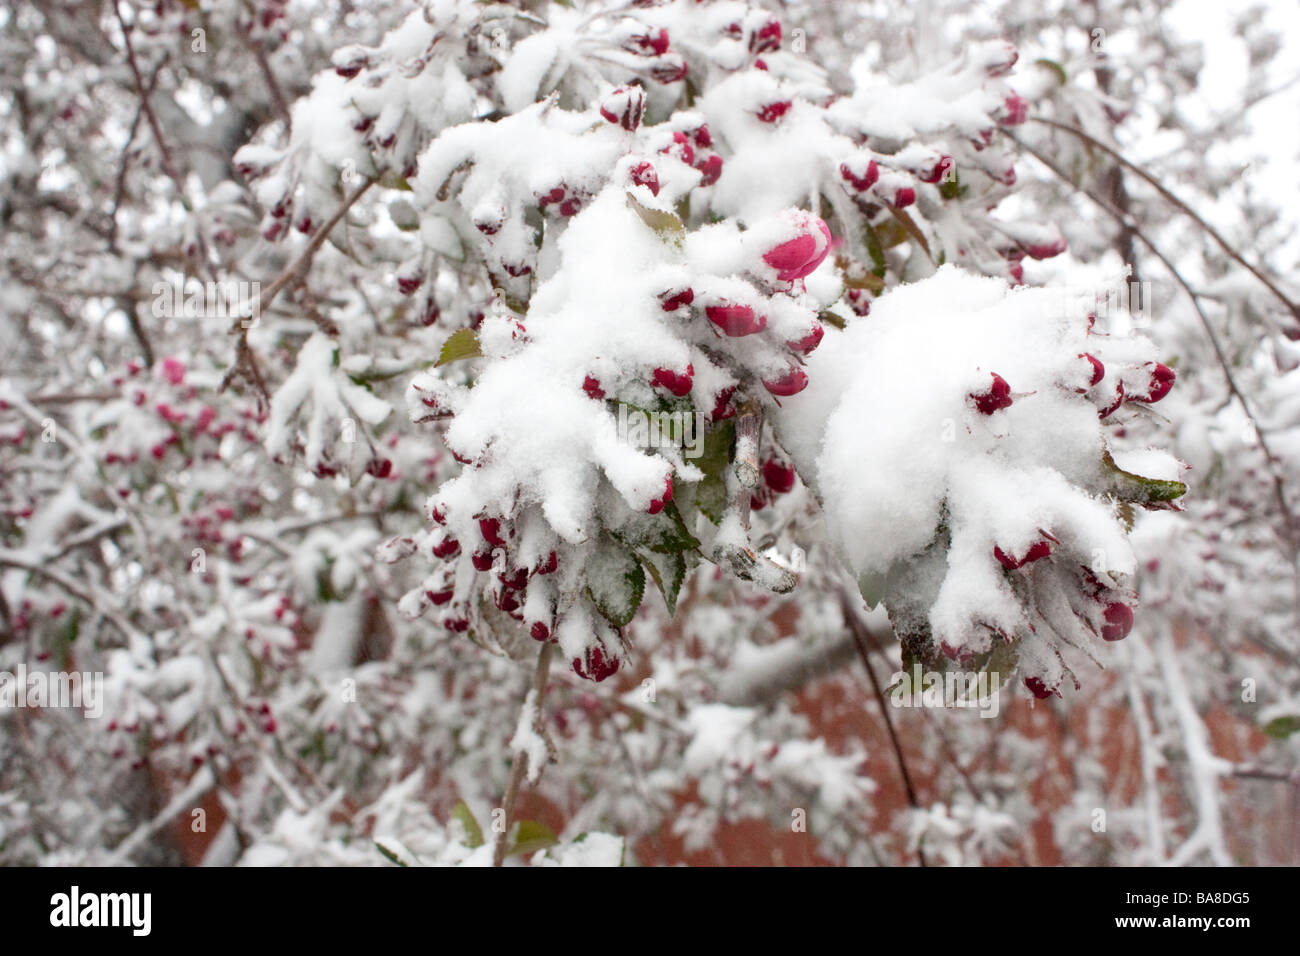 A closeup photo of Crabapple blossoms covered in snow Stock Photo